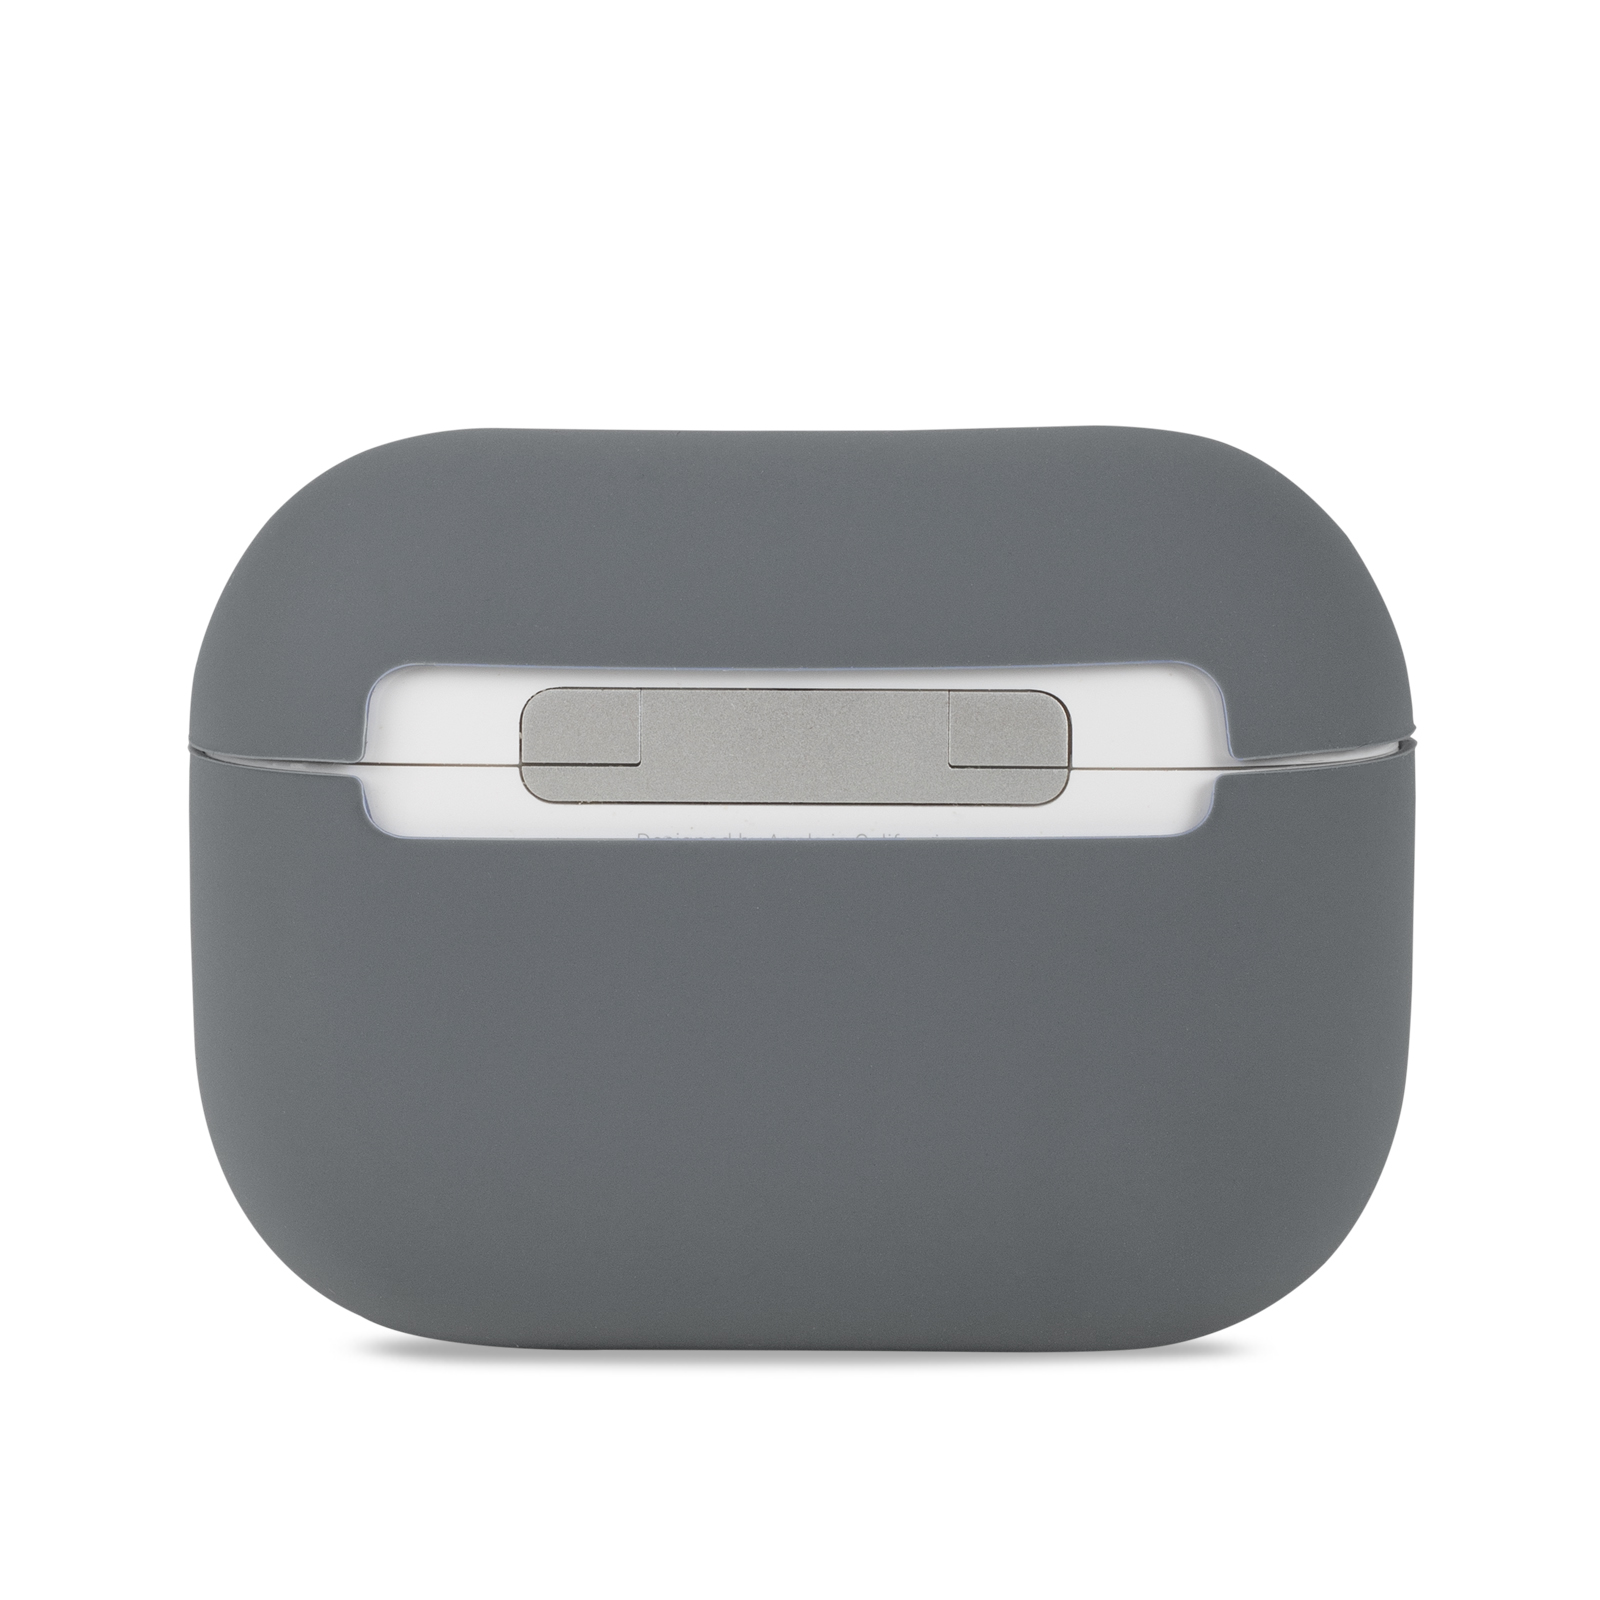 Калъф Holdit Silicone Case за  AirPods Pro  - Space Gray